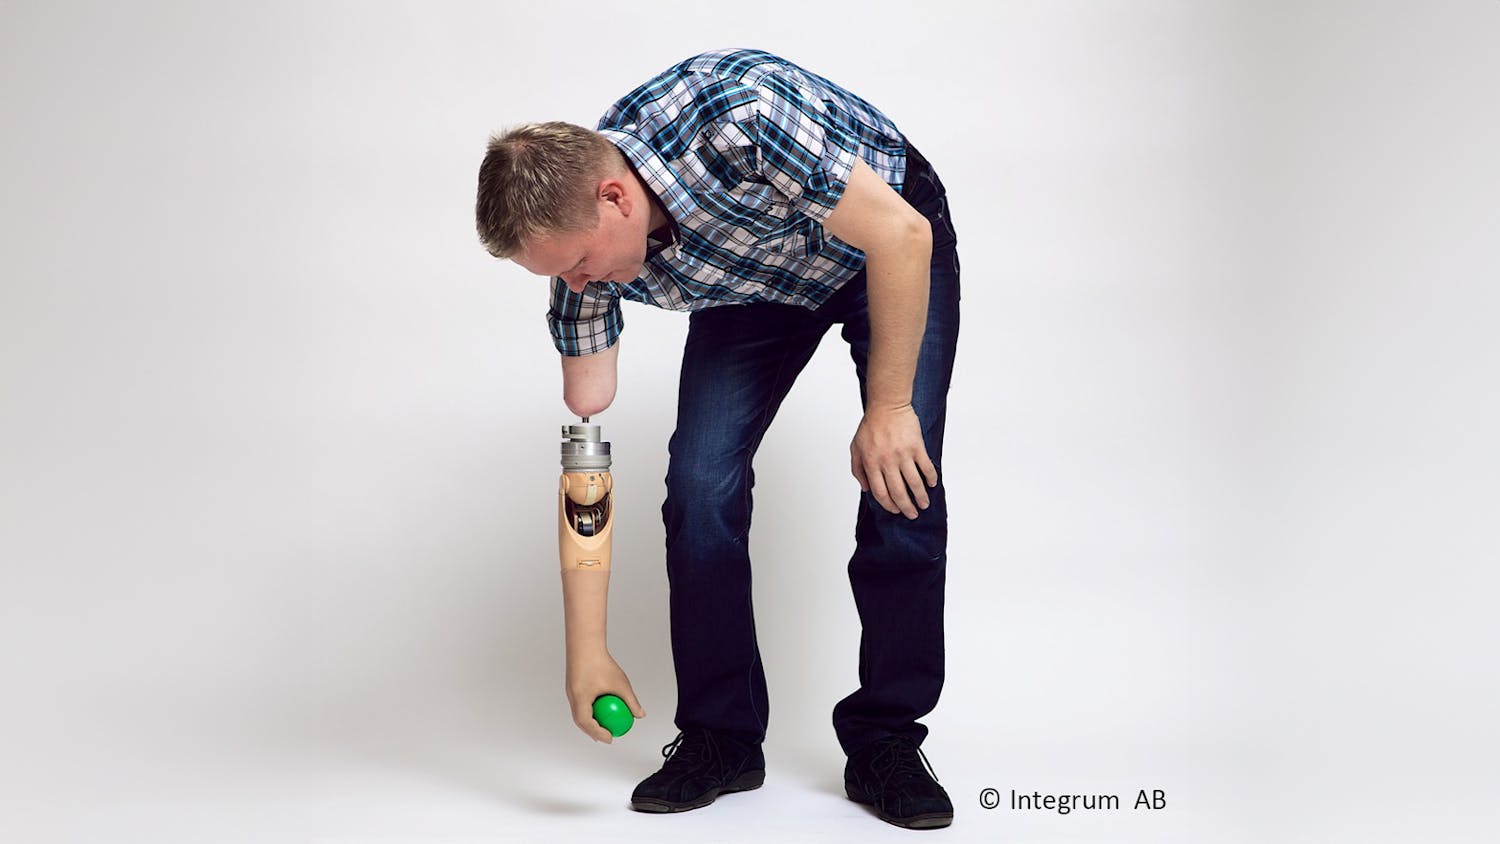 A patient with a neuroprosthesis picks up a rubber ball from the floor.